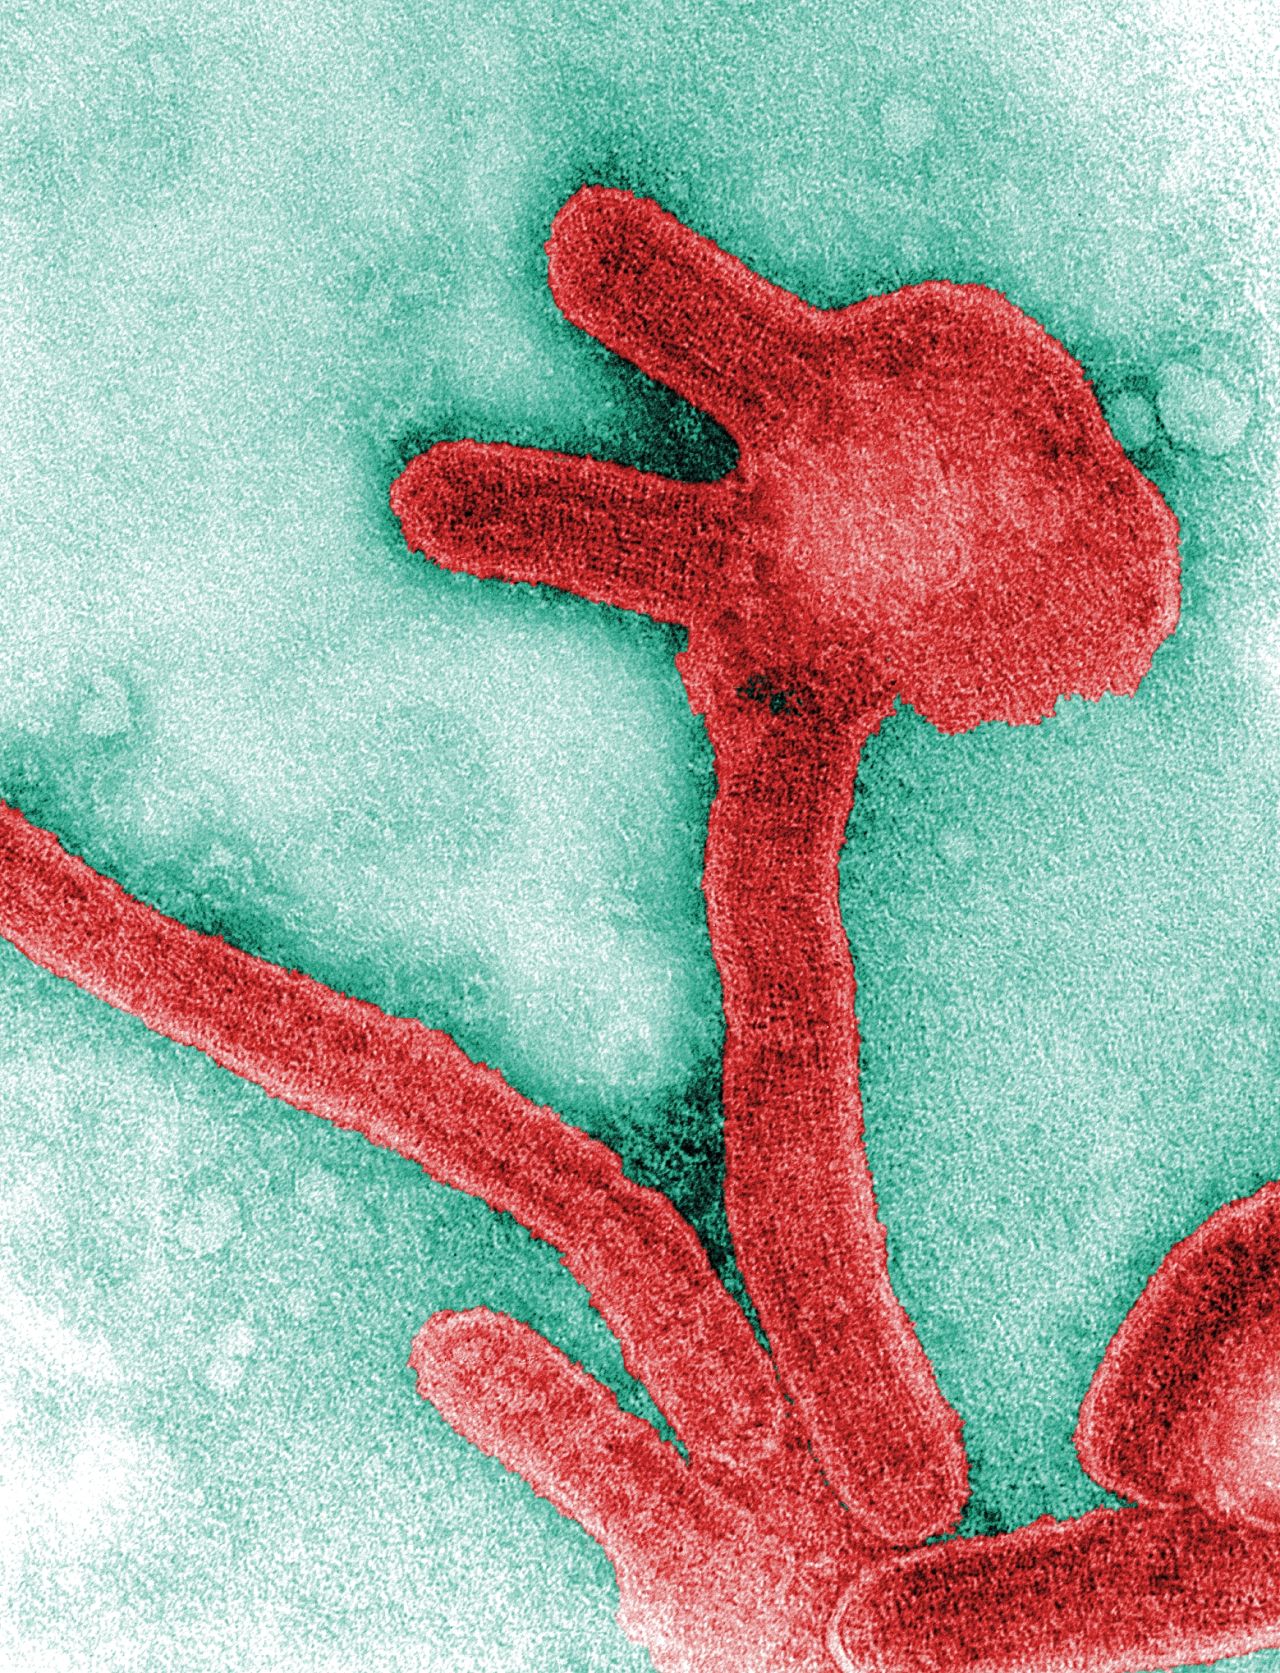 Marburg virus, pictured, is also in the same family of viruses. <a href="http://www.who.int/mediacentre/factsheets/fs_marburg/en/" target="_blank" target="_blank">Marburg virus diseas</a>e is more severe in terms of fatality, but outbreaks are less common.